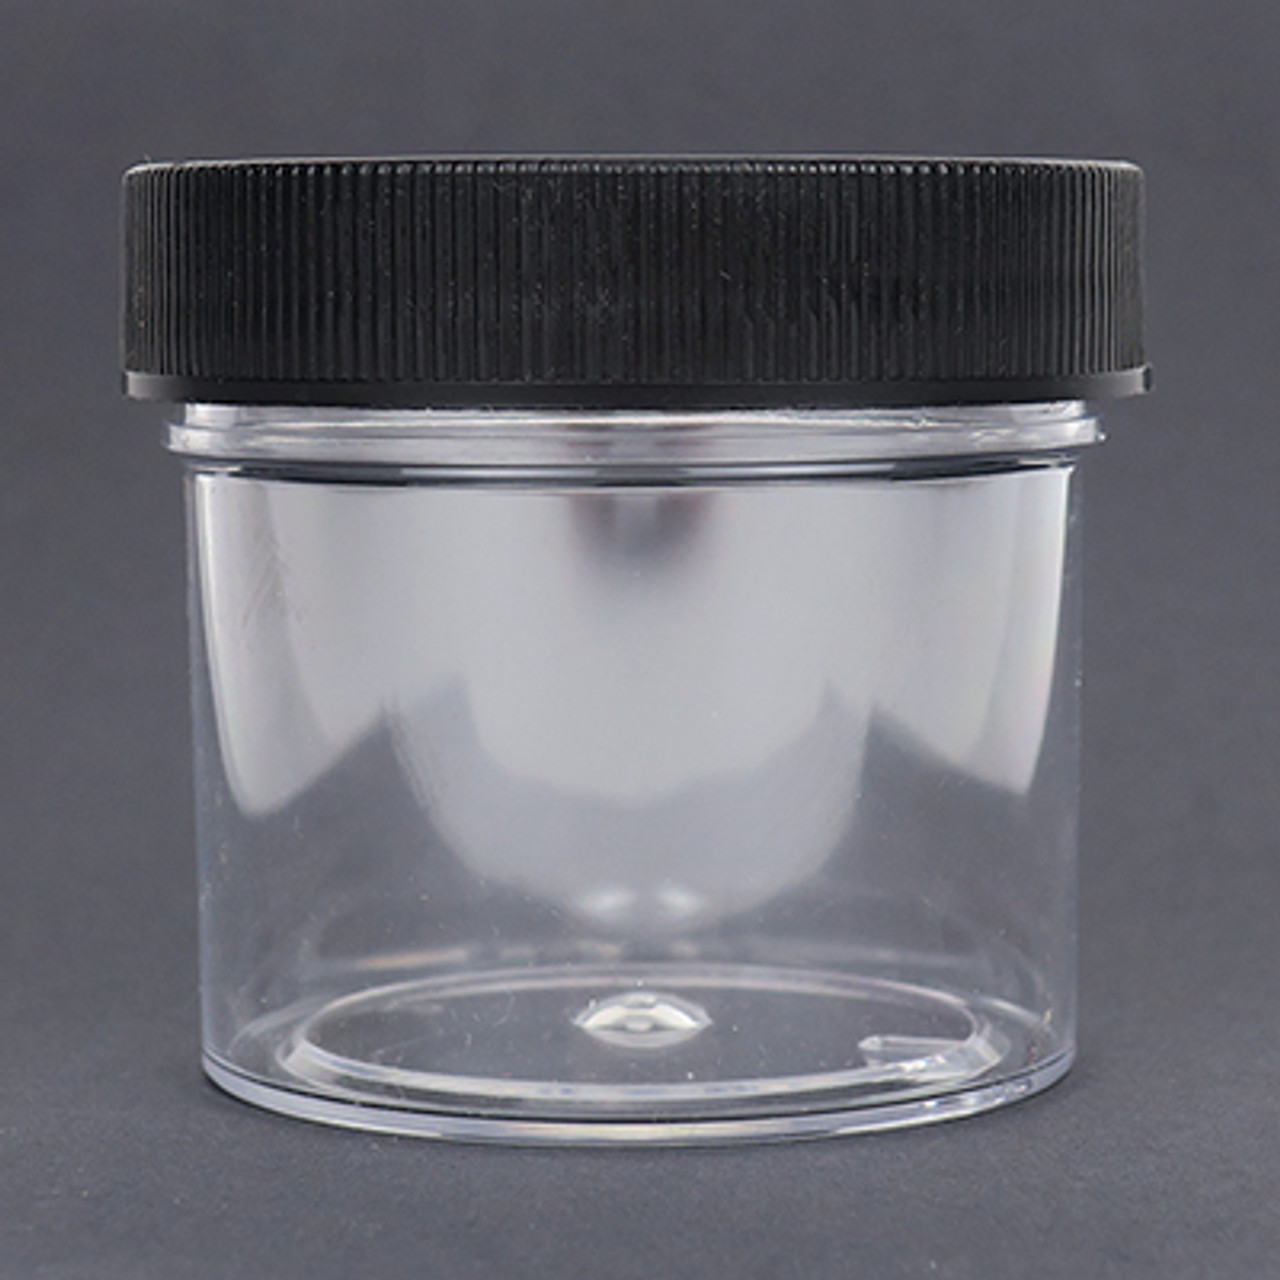 Anyone know where to find huge wide mouth glass jars like this one